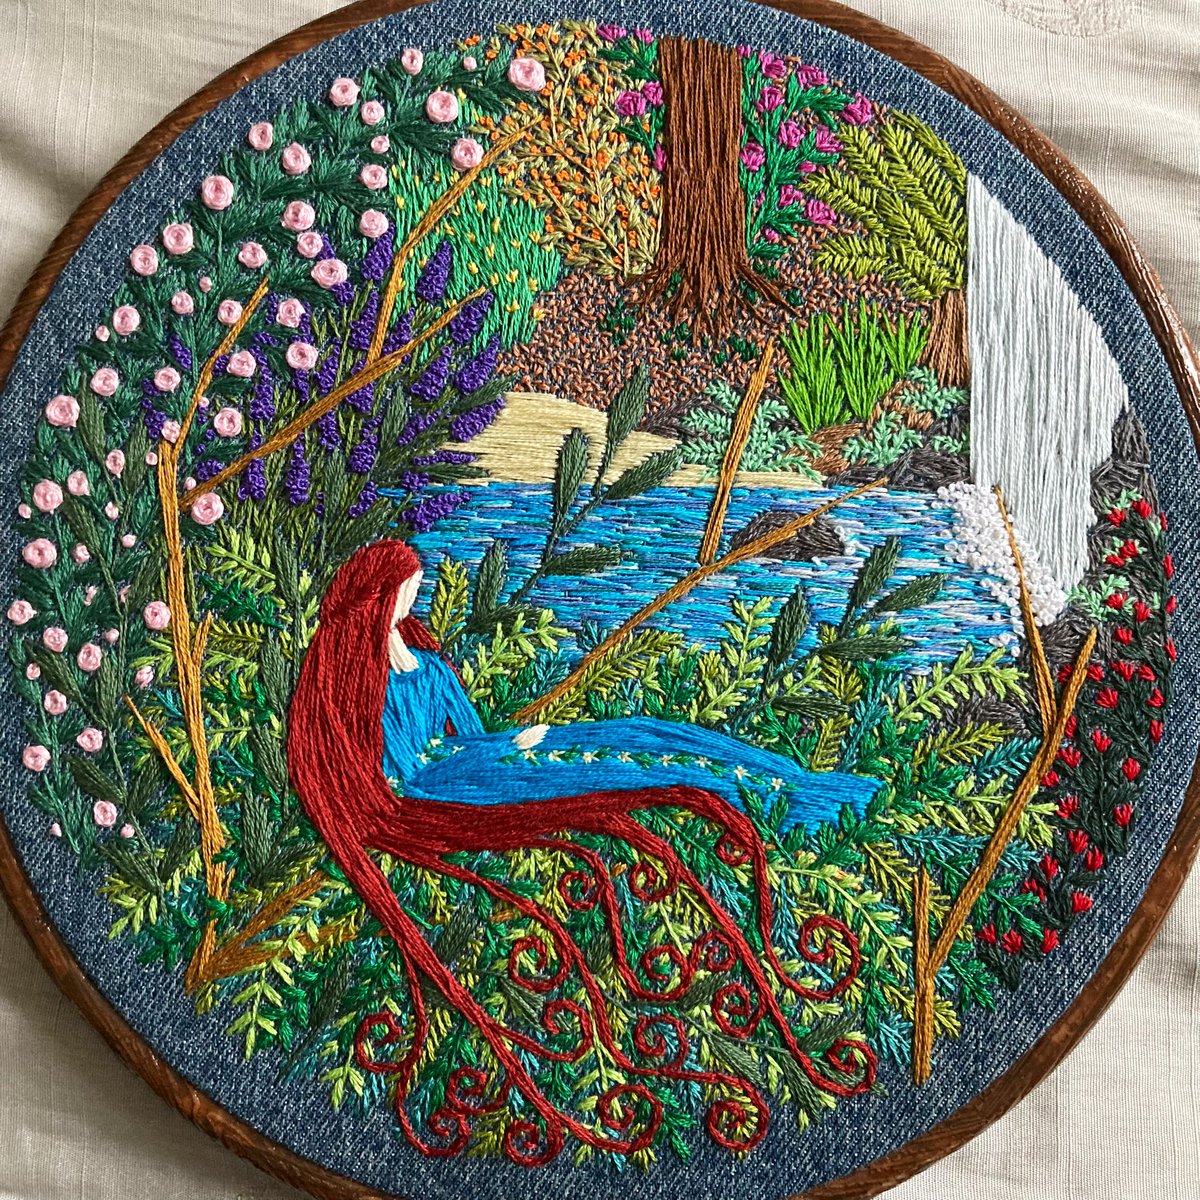 Still here, still stitching 😉🪡 Here’s a look back at my embroidery, The Lady of the Valley for you today. Completely freehand stitched in July 2021.🌿🌺🪻*no patterns, paint or guides, just threads. 🧵#stitchedart #thesewingsongbird